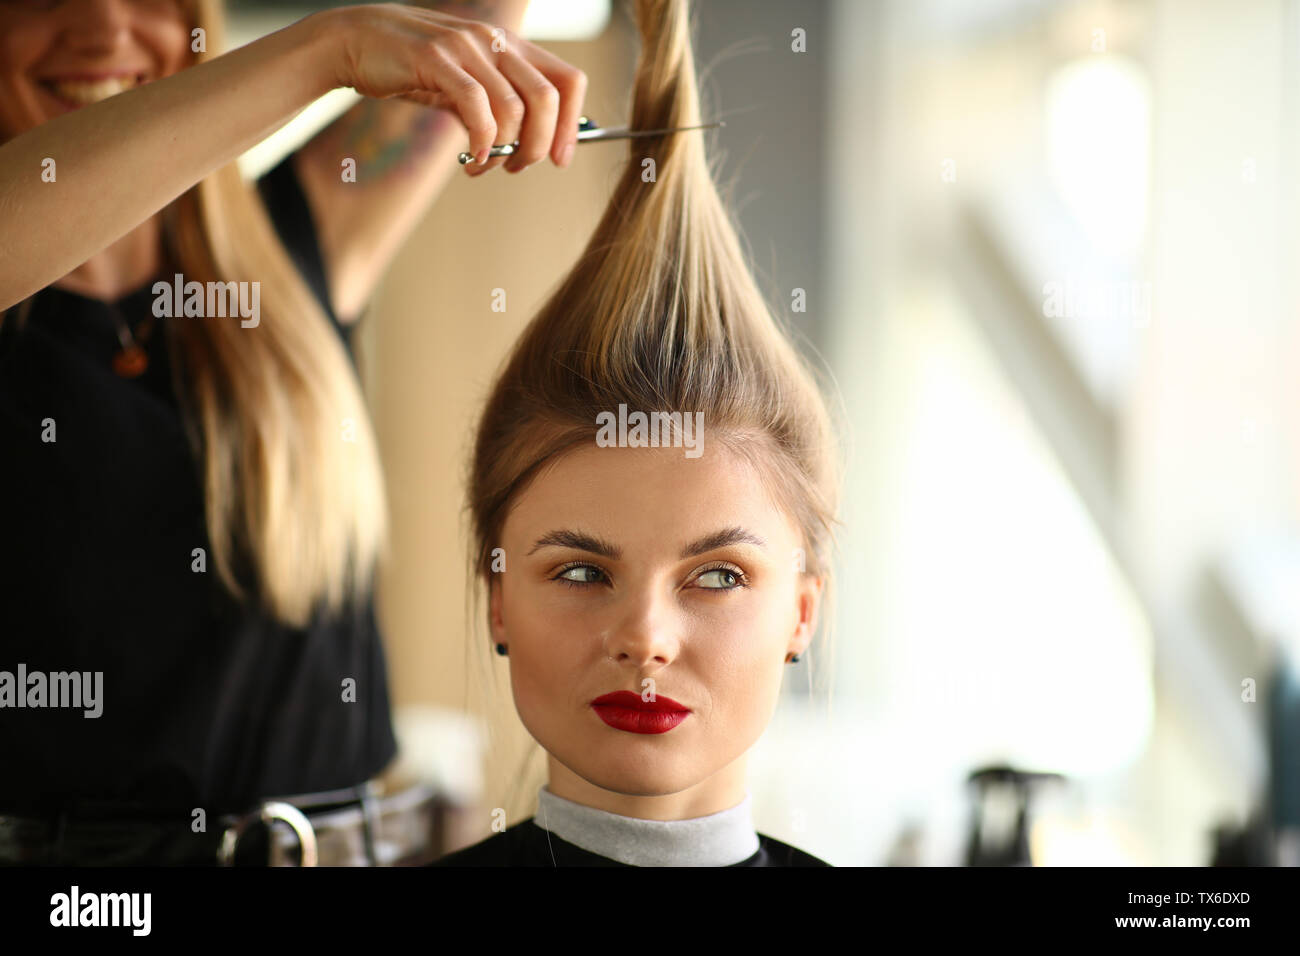 Young Woman With Ponytail Getting Haircut In Salon Hairdresser